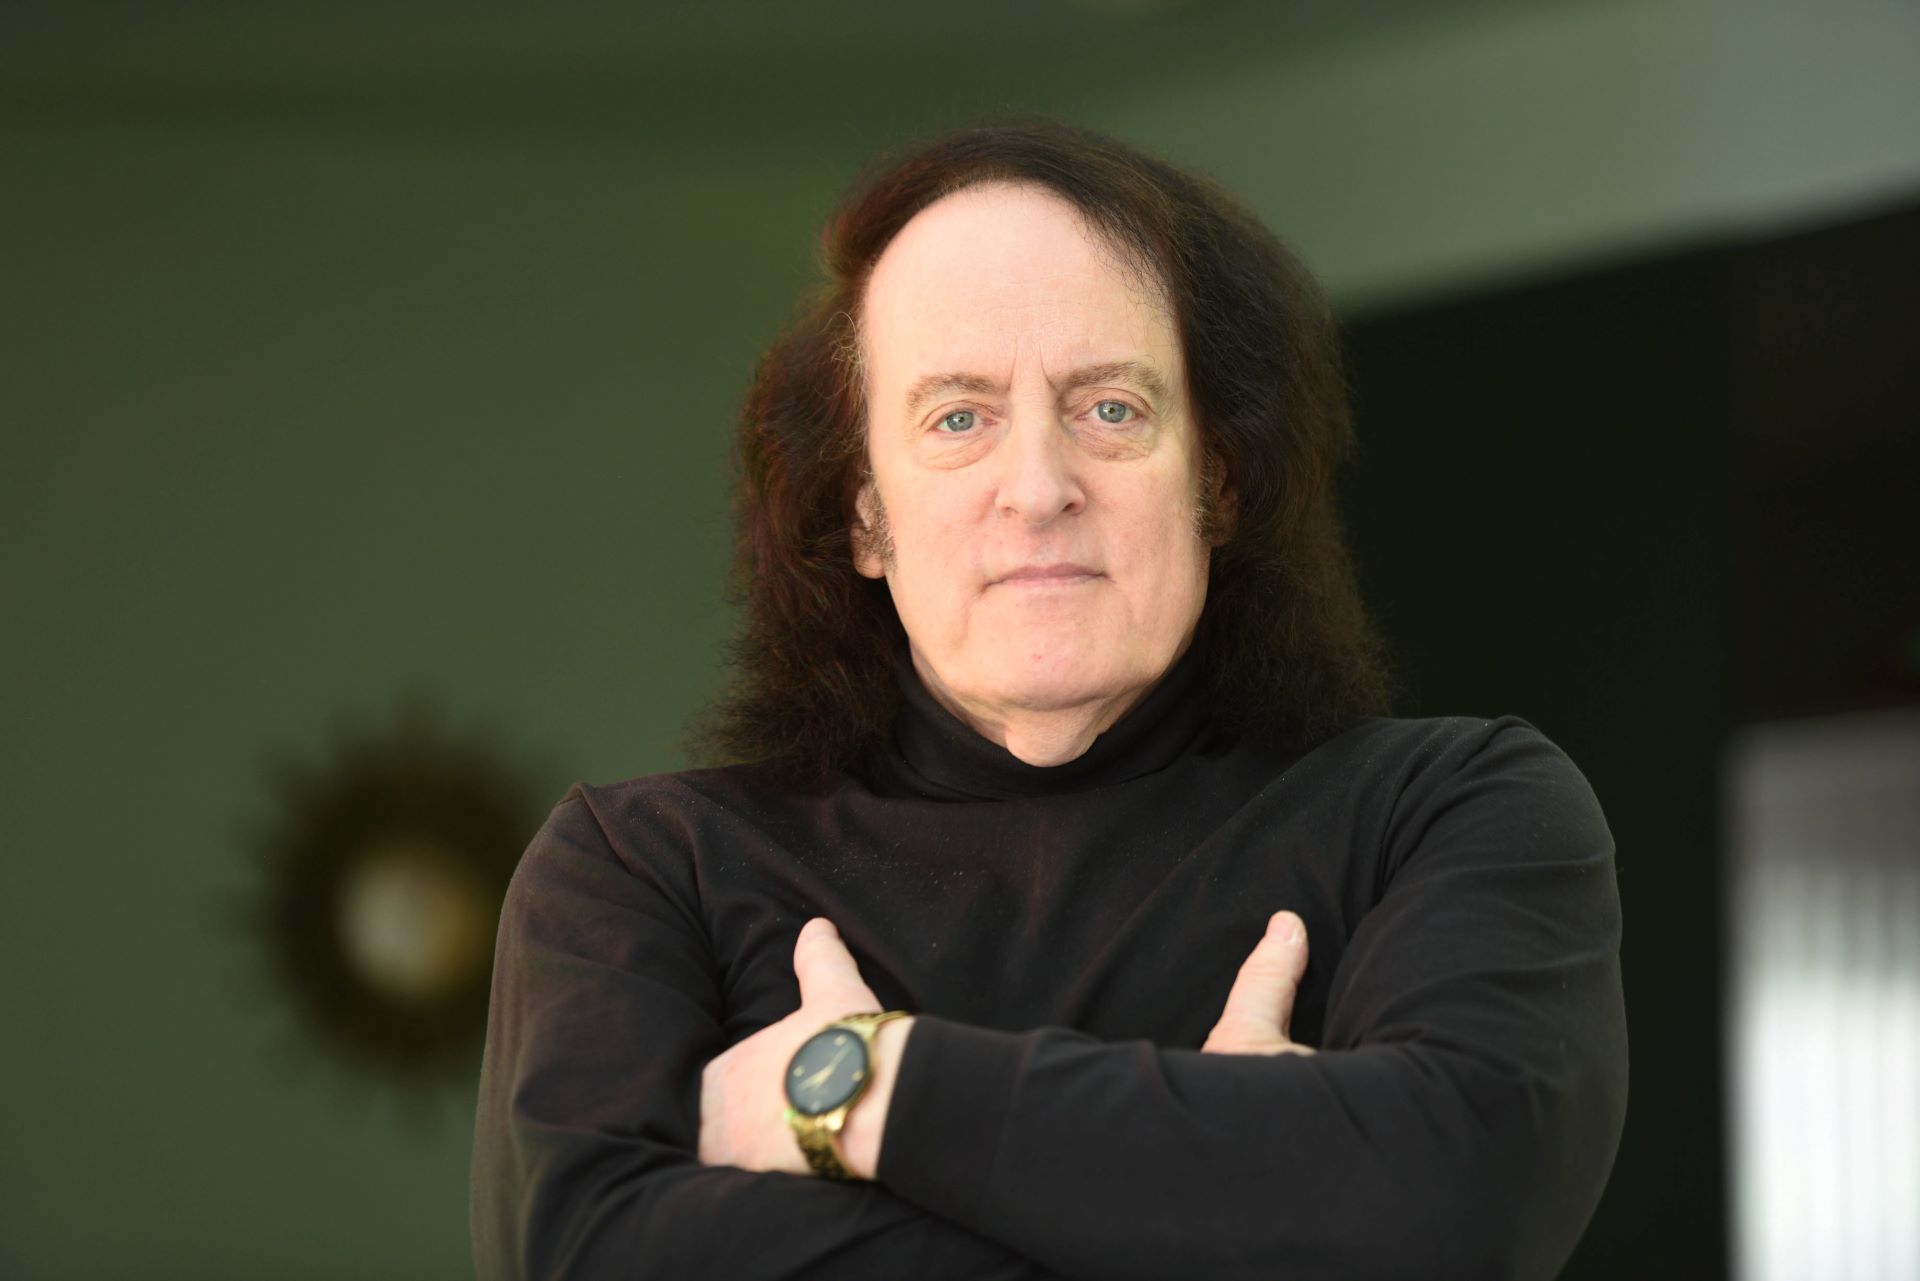 16 Captivating Facts About Tommy James - Facts.net